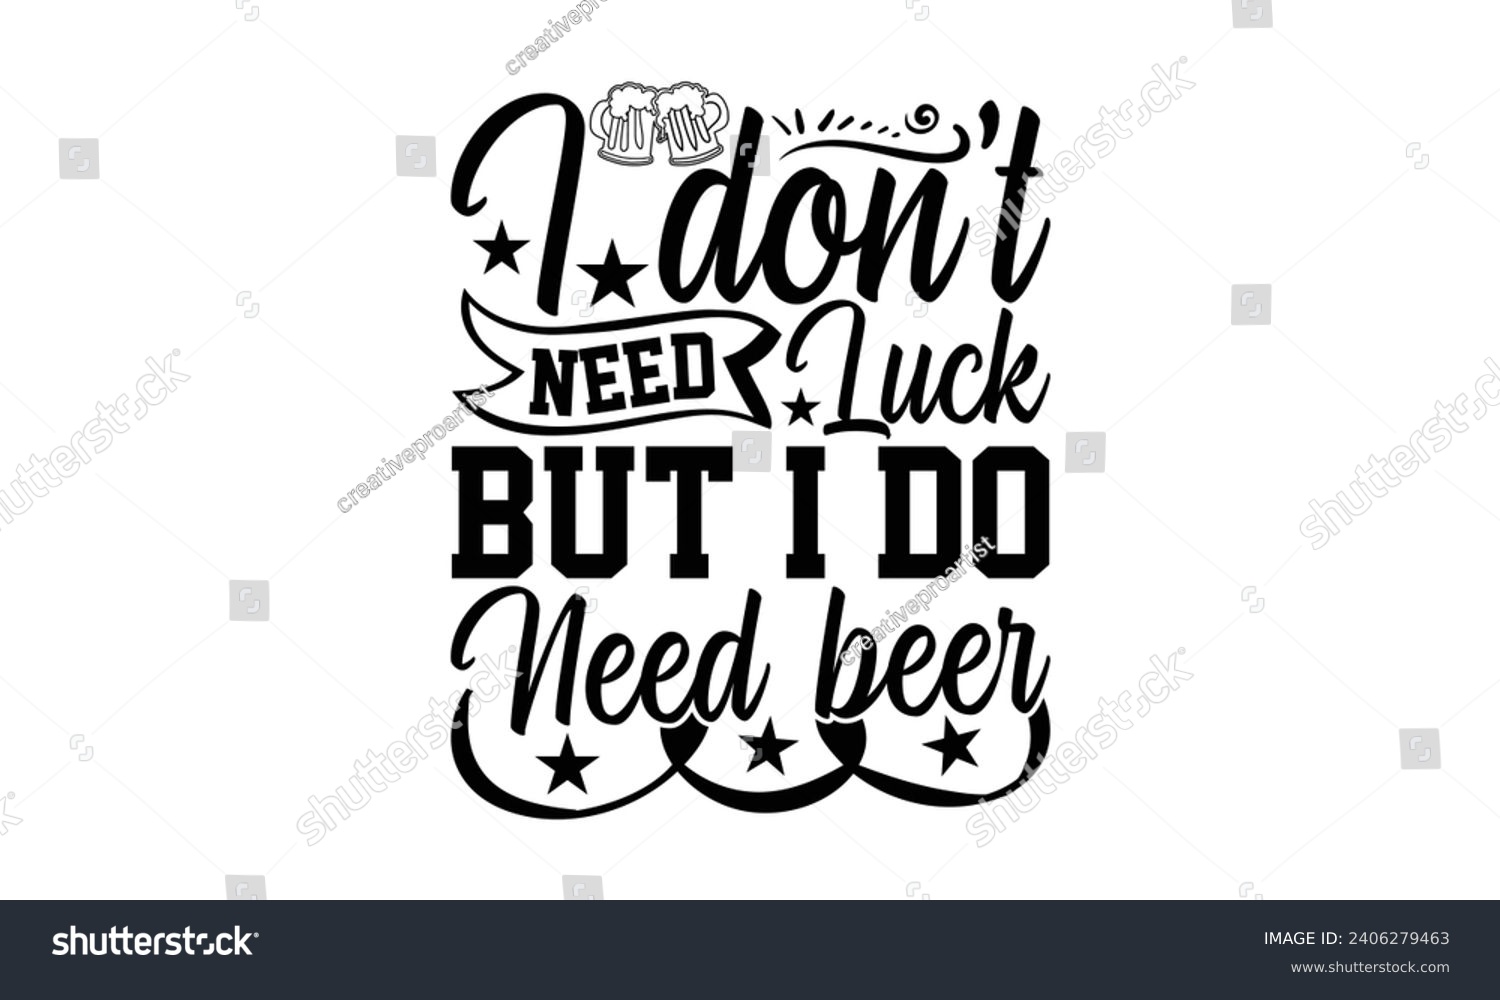 SVG of I Don’t Need Luck But I Do Need Beer- Beer t- shirt design, Handmade calligraphy vector illustration for Cutting Machine, Silhouette Cameo, Cricut, Vector illustration Template. svg